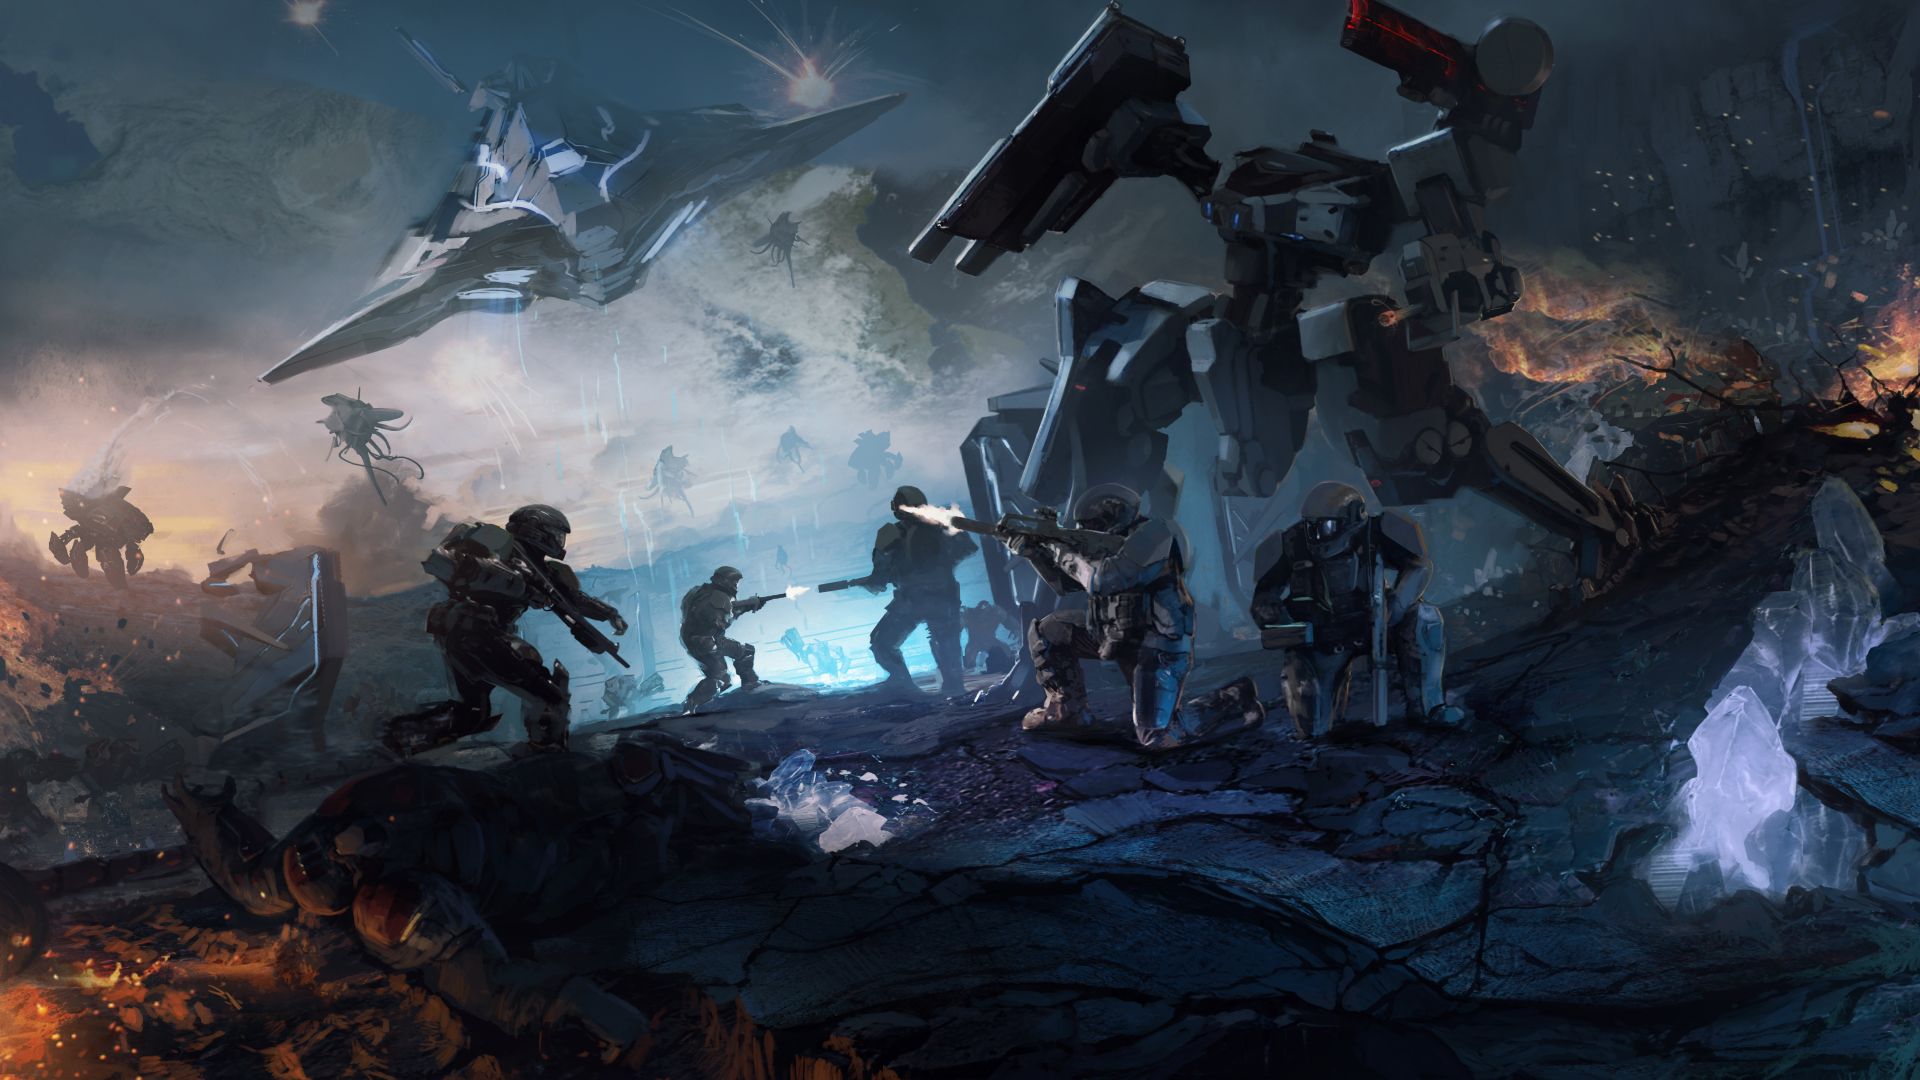 halo wars 2 wallpaper,action adventure game,strategy video game,pc game,cg artwork,adventure game